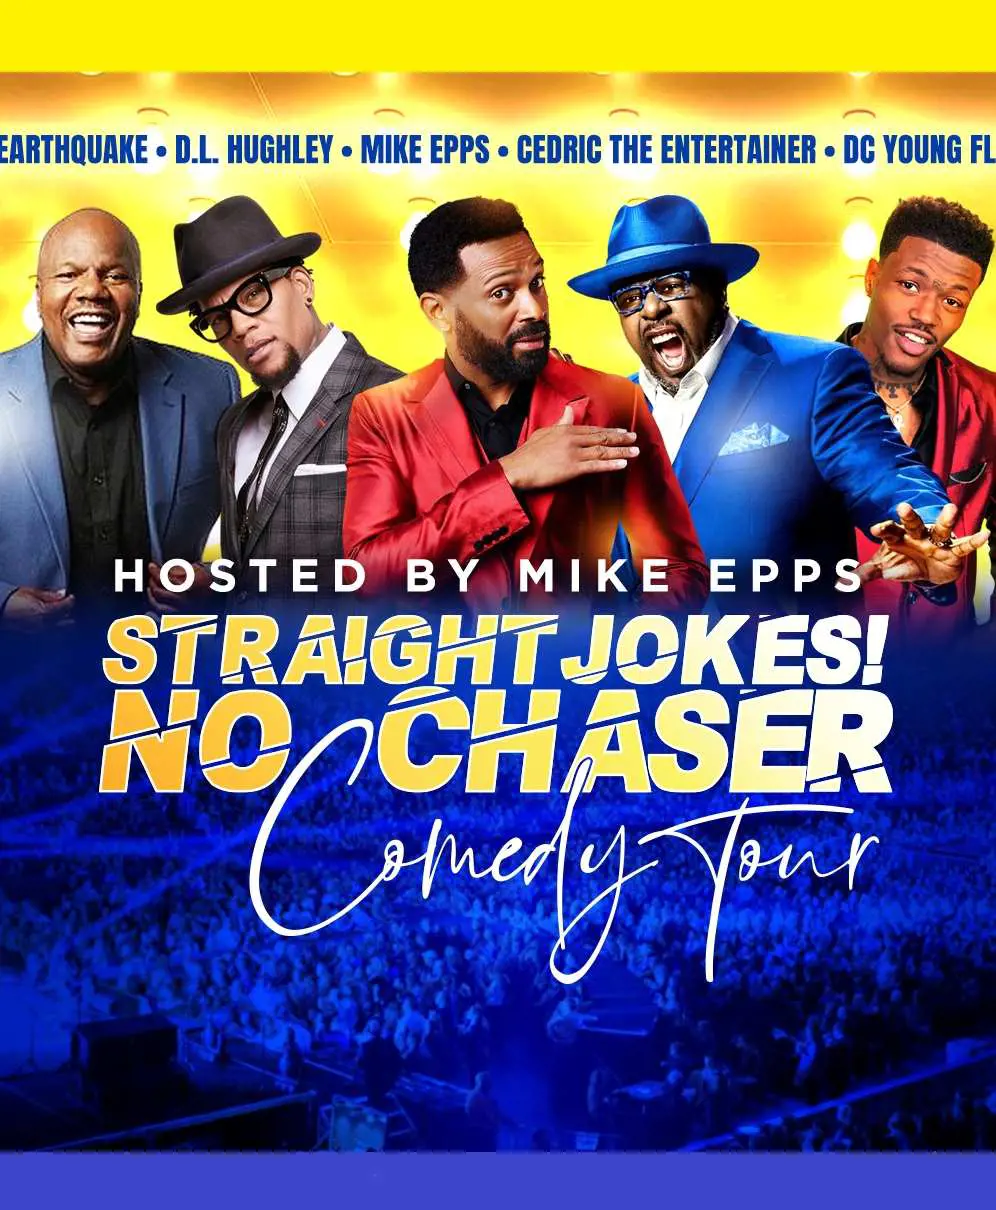 Straight Jokes! No Chaser Comedy Tour hosted by Mike Epps with Cedric the Entertainer, D.L. Hughley, Earthquake & D.C. Young Fly